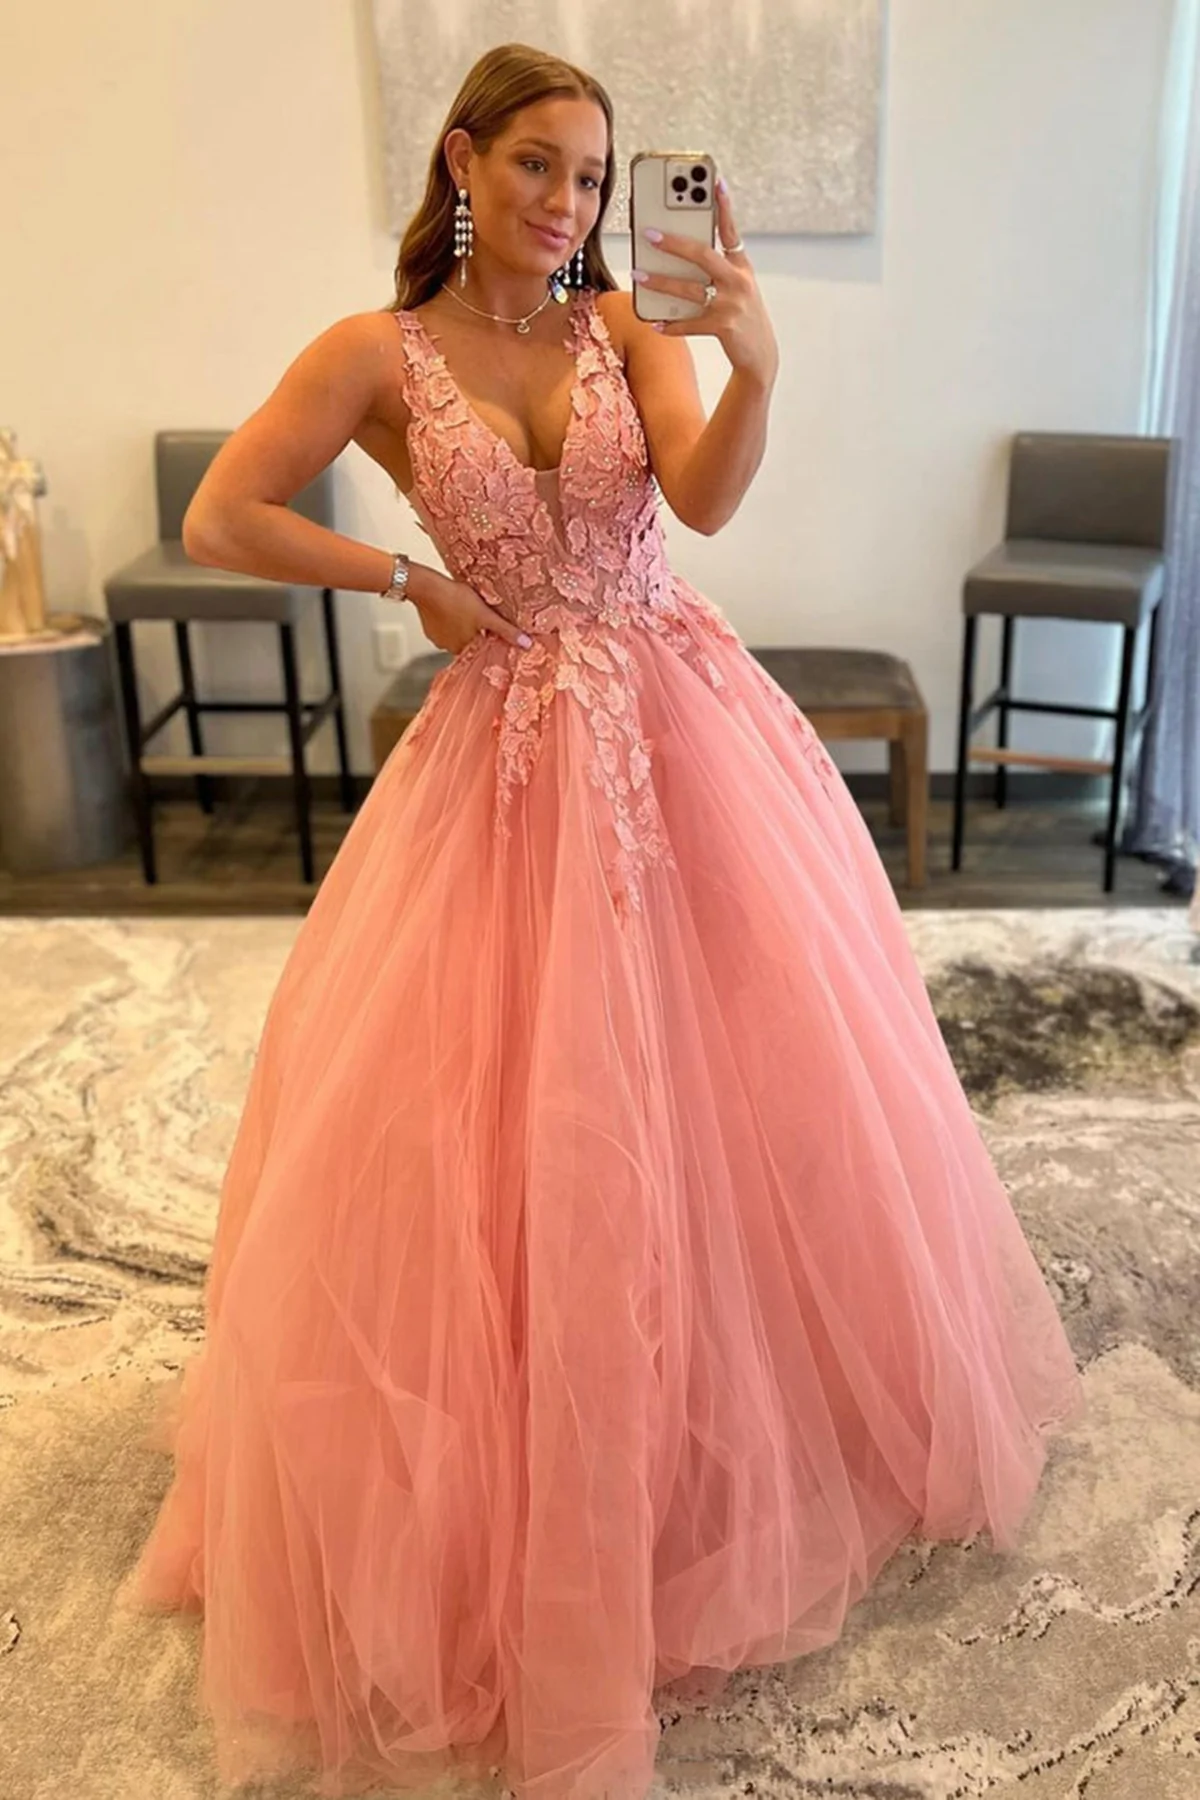 V Neck Open Back Beaded Pink Lace Long Prom Dresses, Pink Tulle Formal Dresses with Lace Appliques, Pink Lace Evening Dresses  nv186